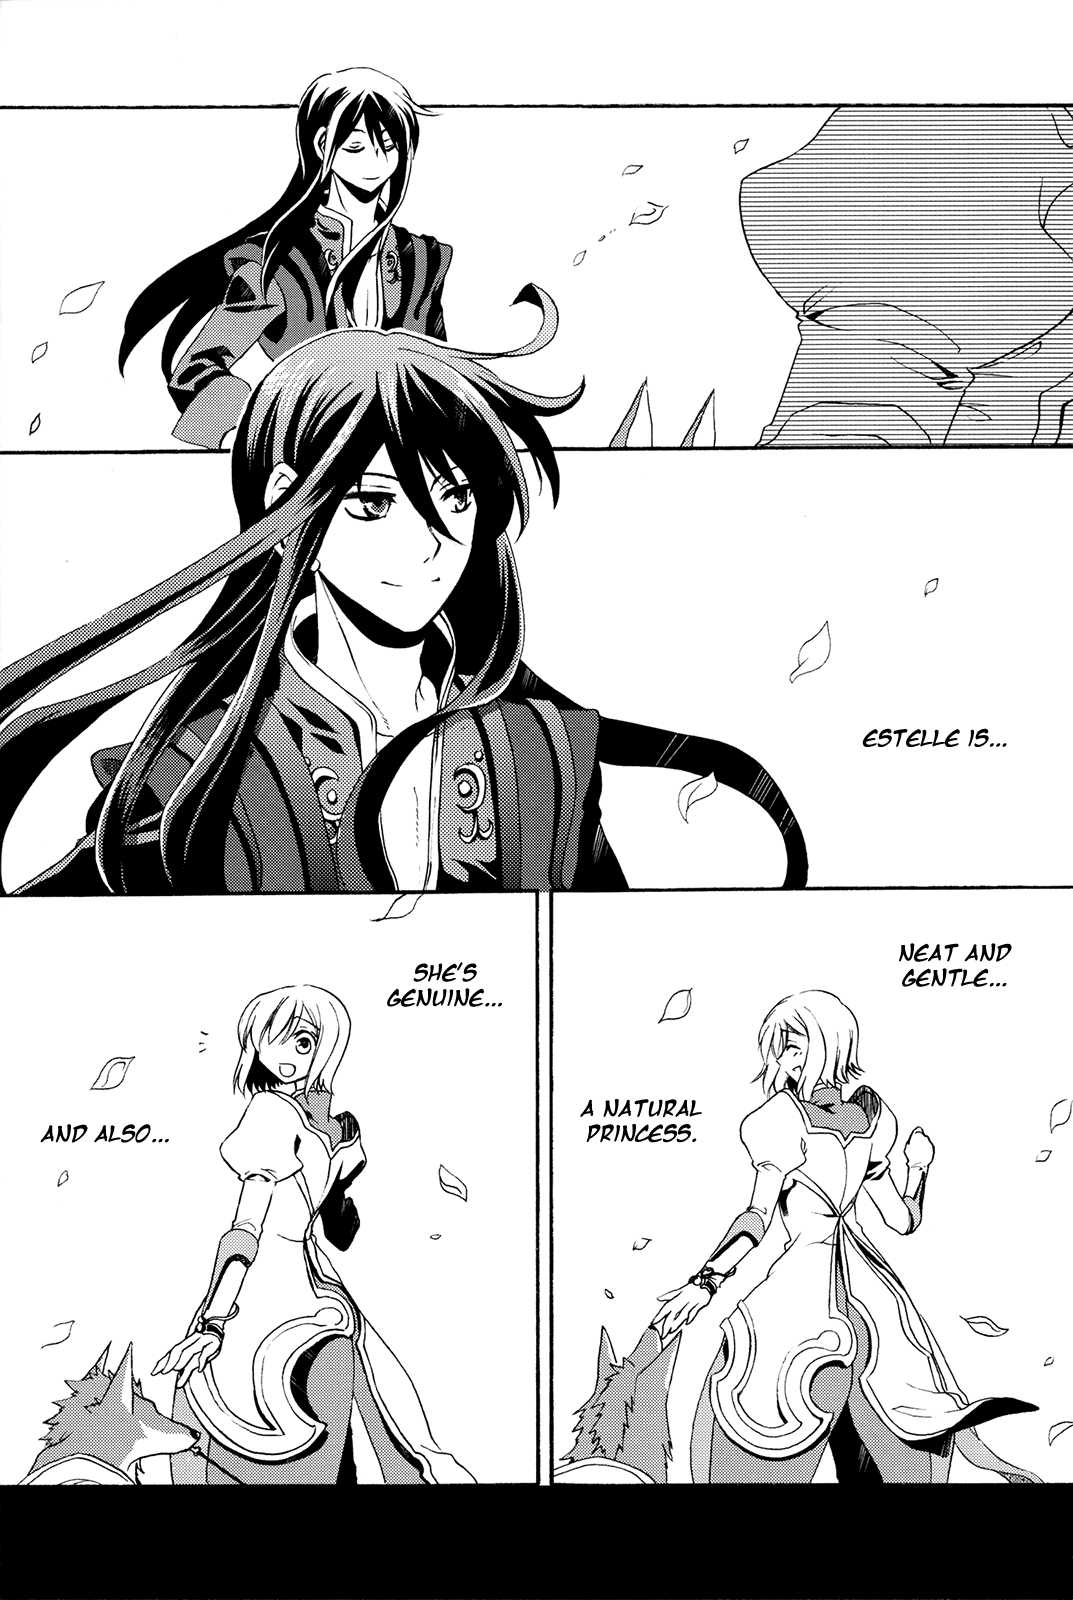 [Aoi Sora (Aozora Air)] Stained in Black, and then Dyed White (Tales of Vesperia) [English] 